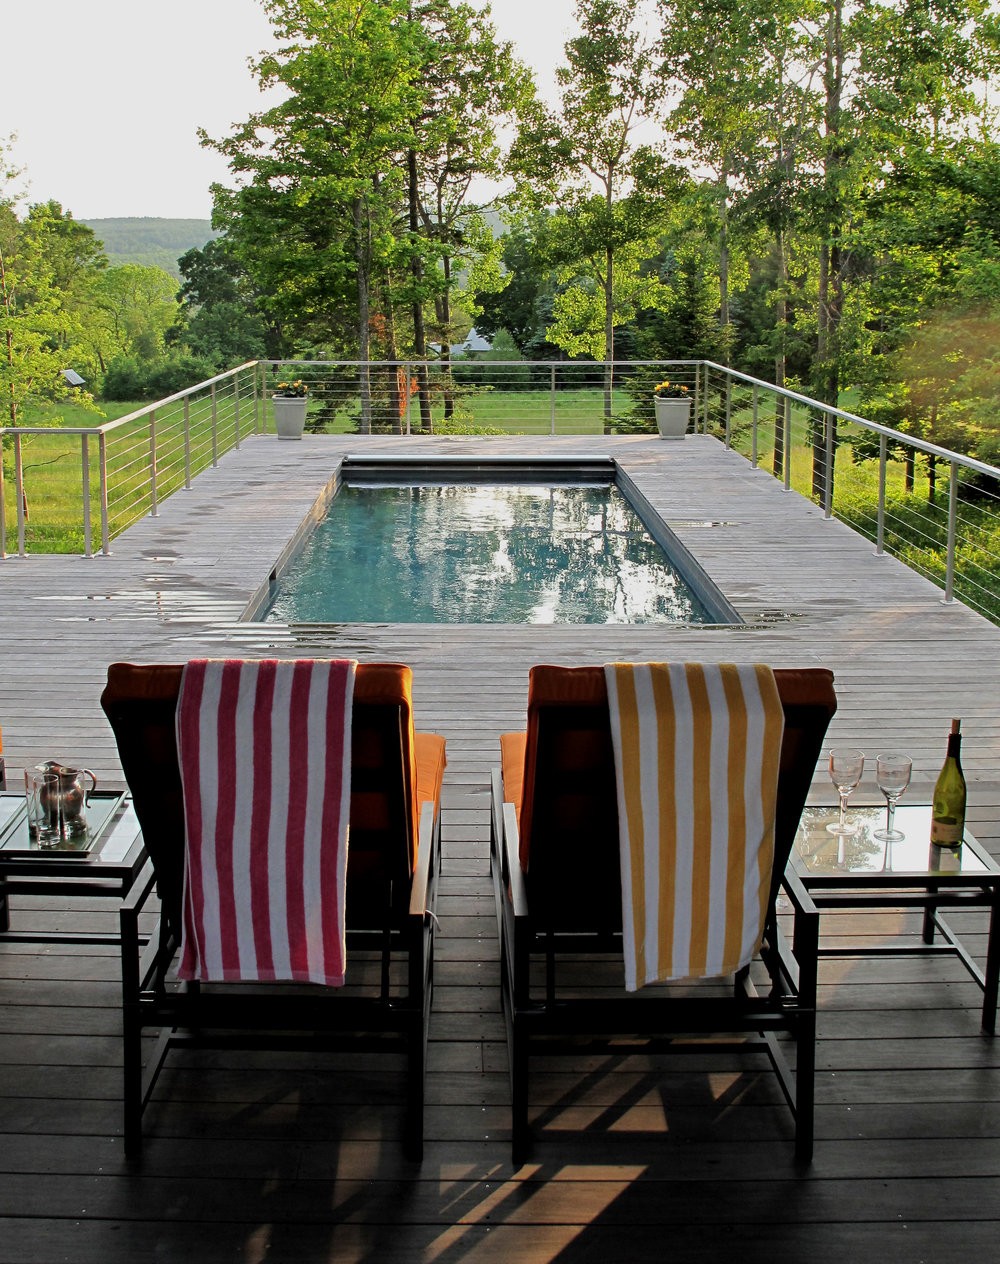 ag1 Cool above ground pool decks to use as inspiration for your own